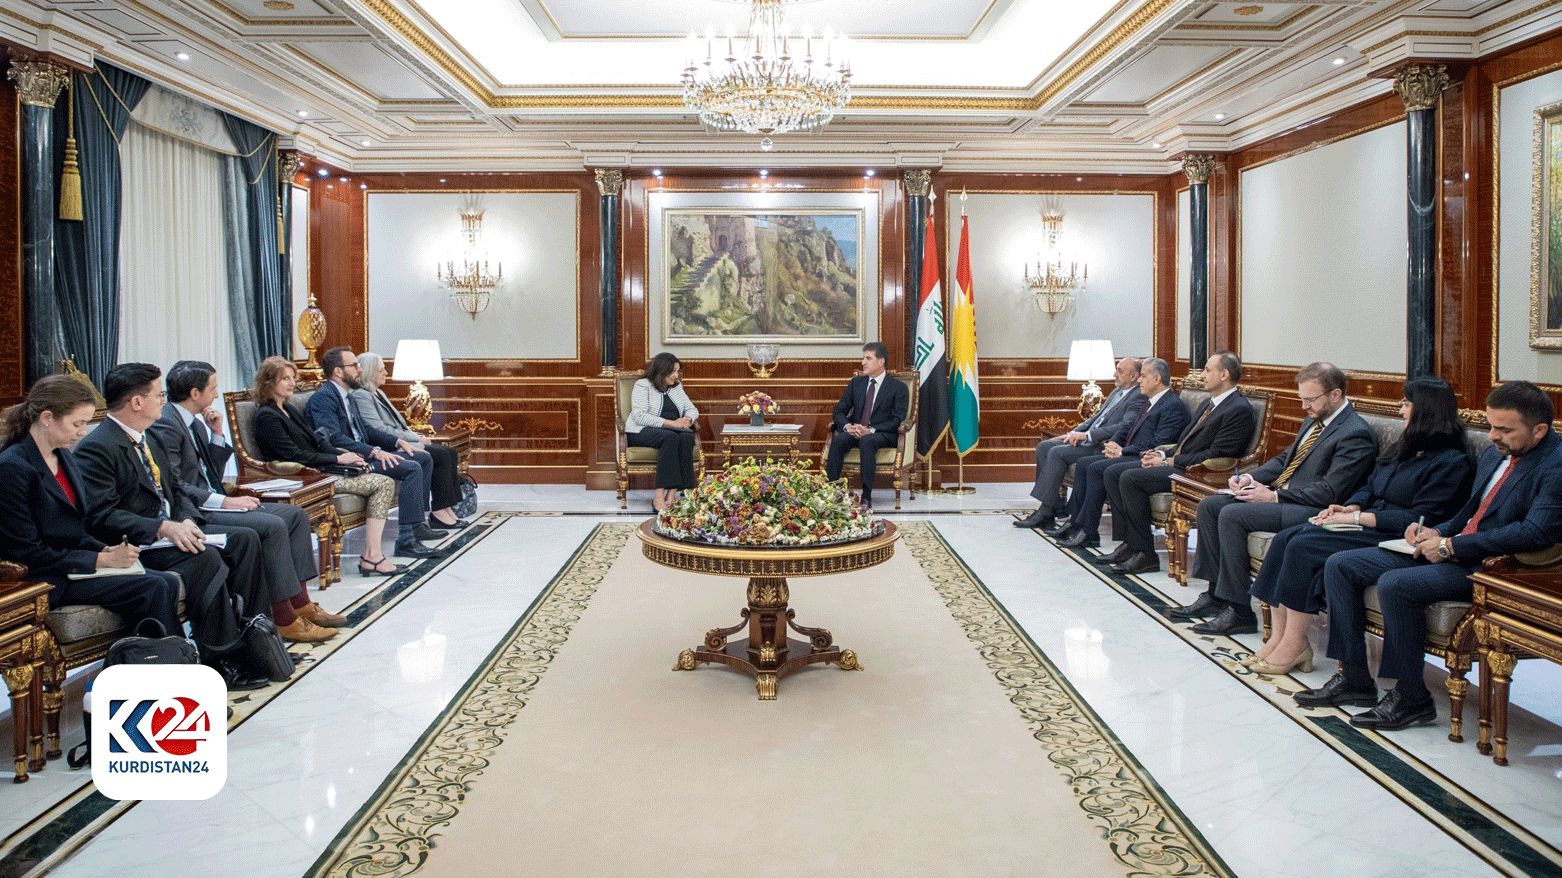 Iraq Egypt and Jordan collaborate on multiple fronts